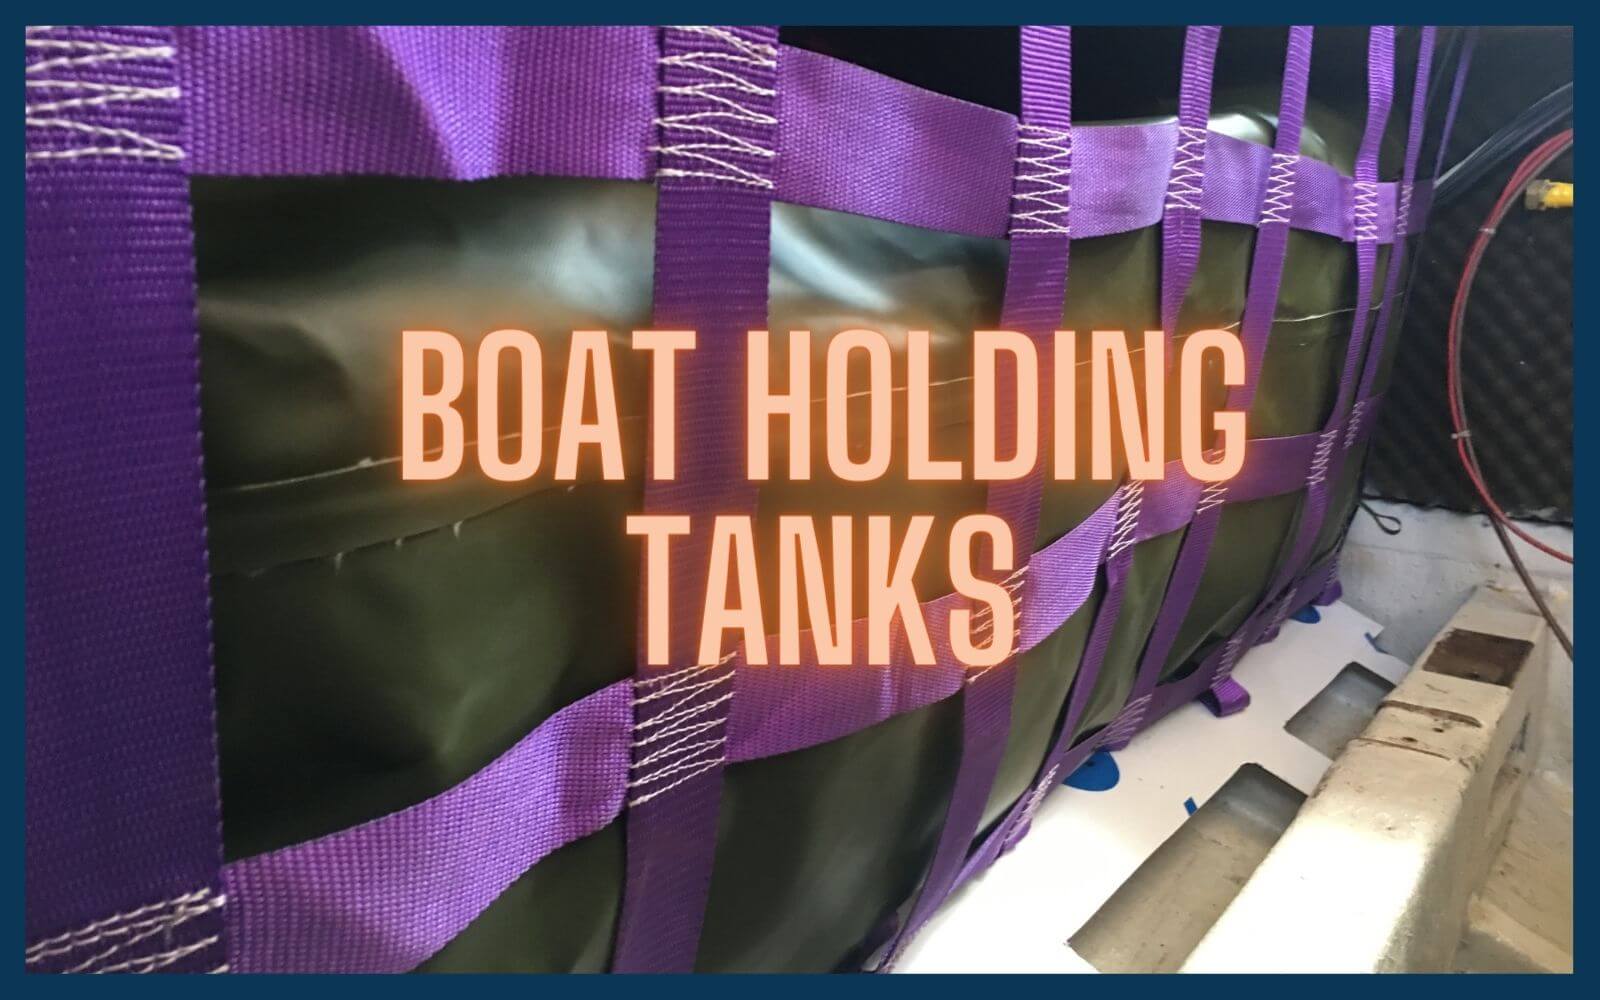 Legal Requirements:Using Boat Holding Tanks While Sailing